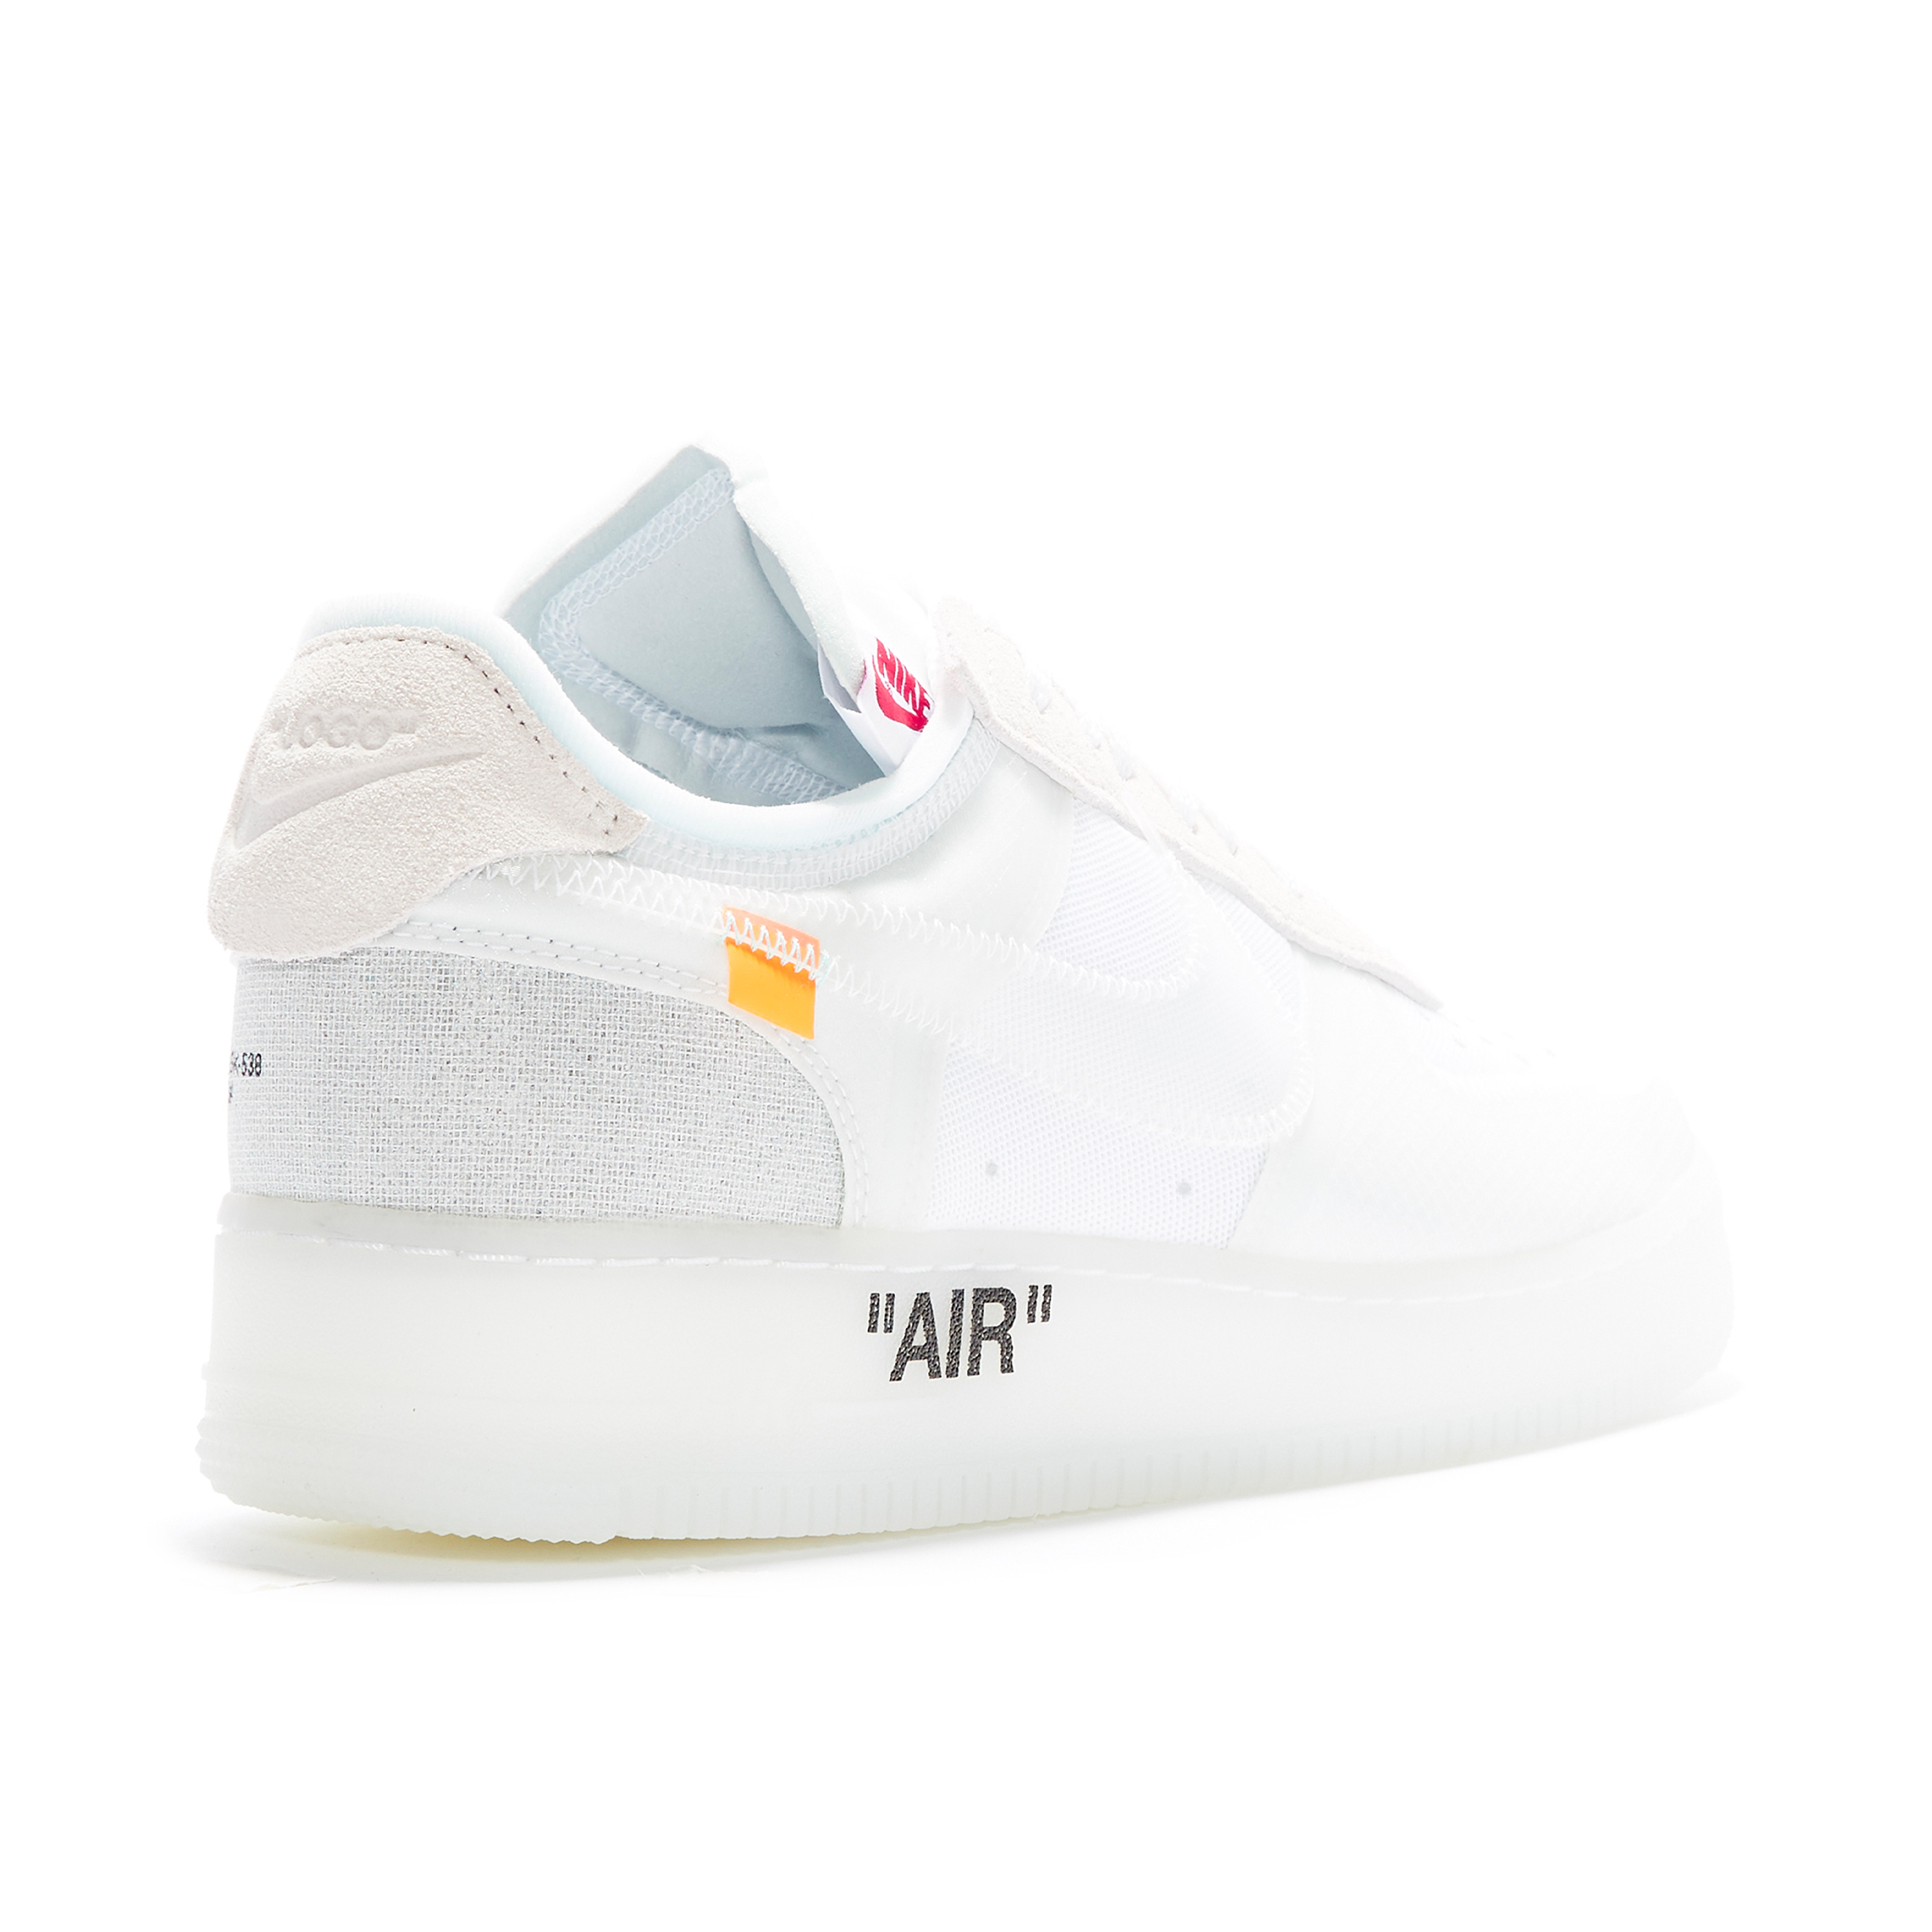 Off White x Nike Air Force 1 Low The Ten AO4606-100